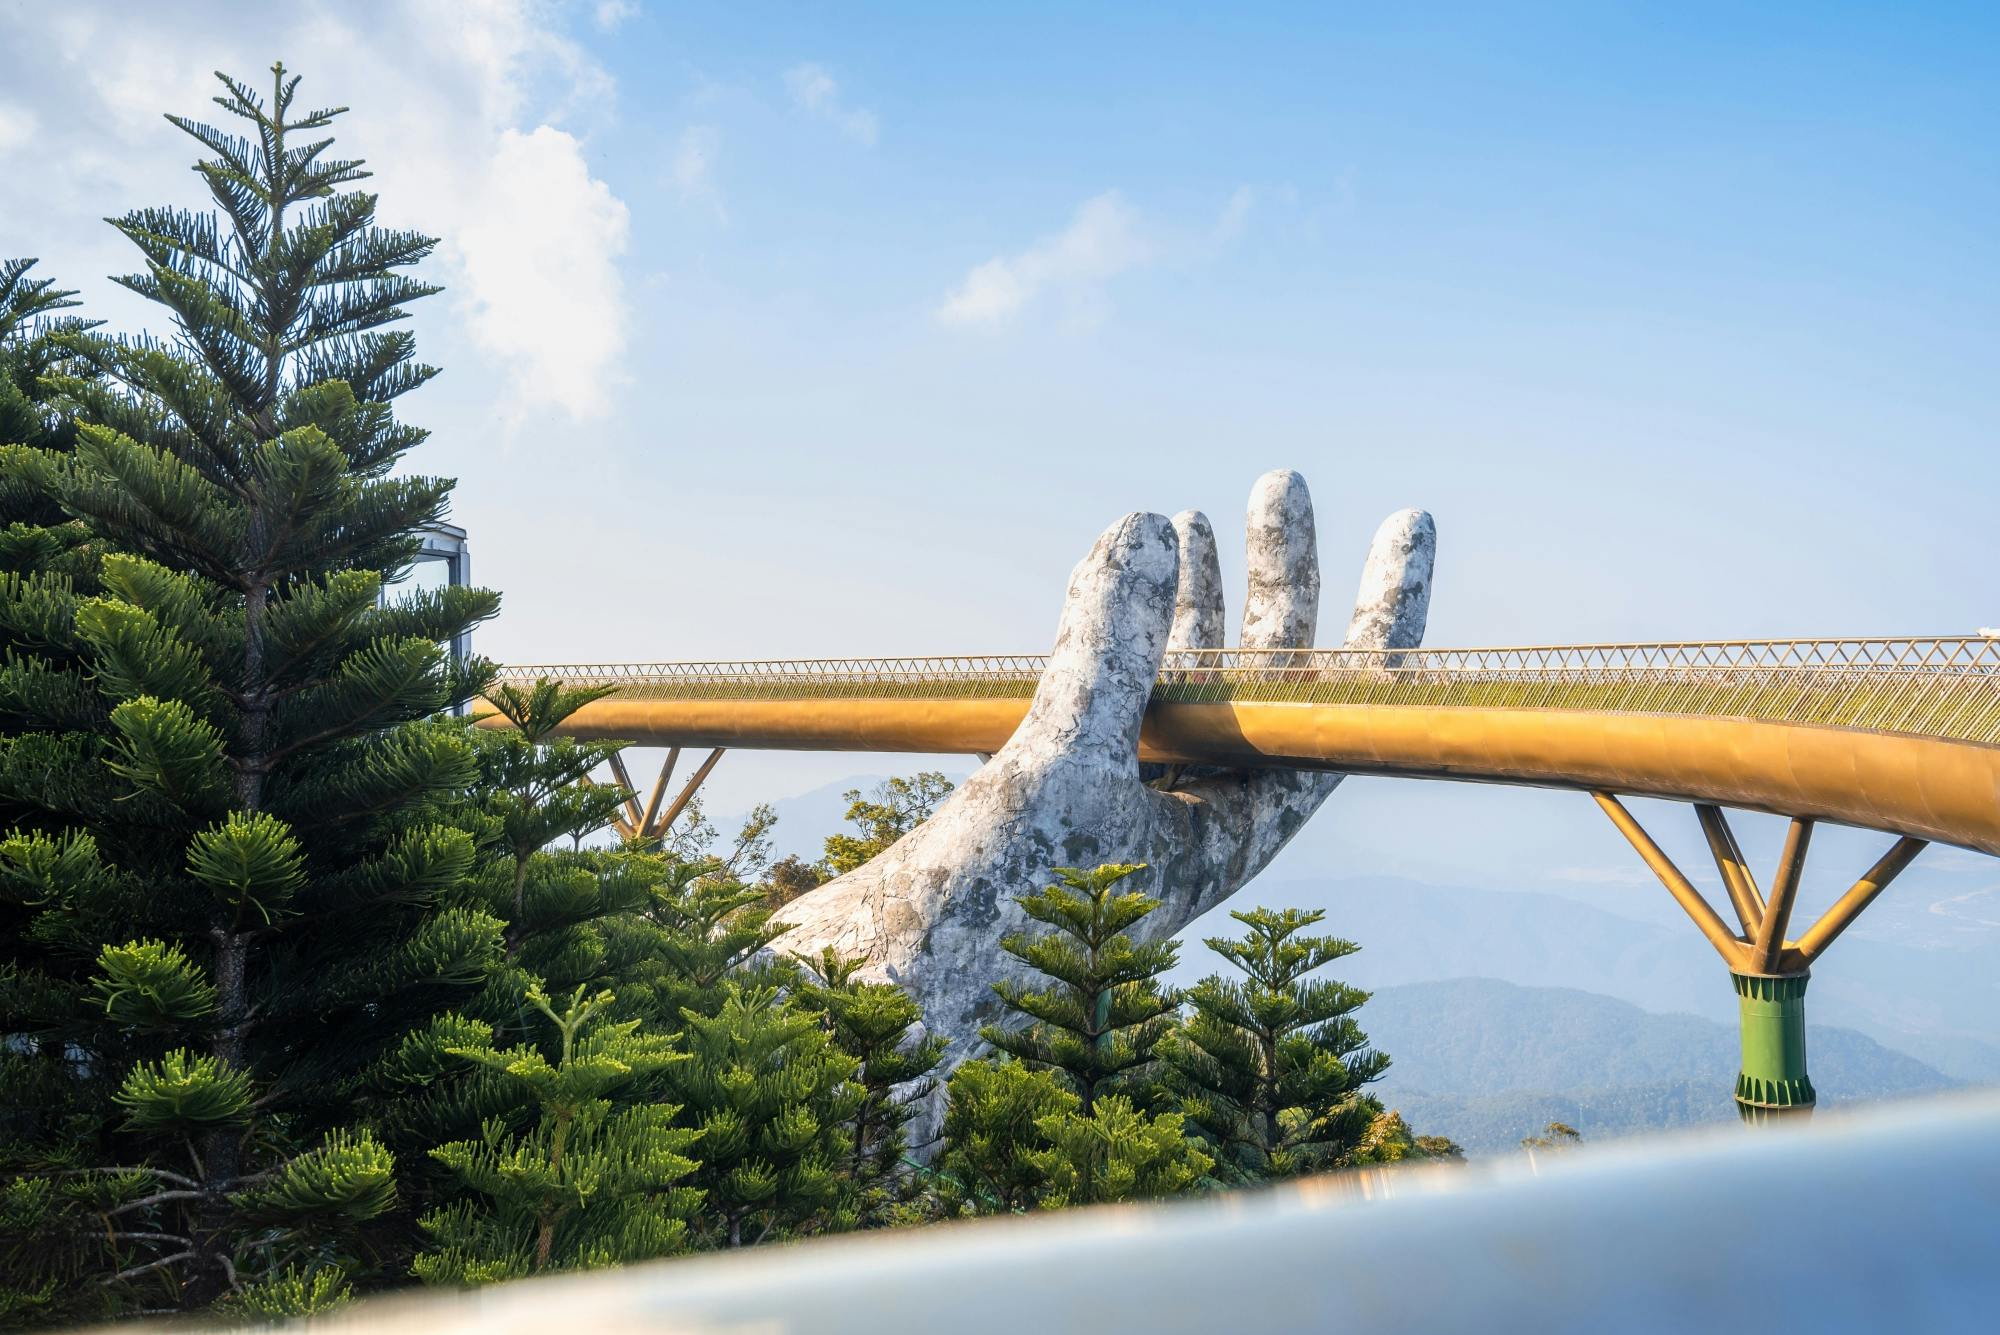 1-Day Guided Tour to the Golden Bridge from Hoi An via Cable Cab